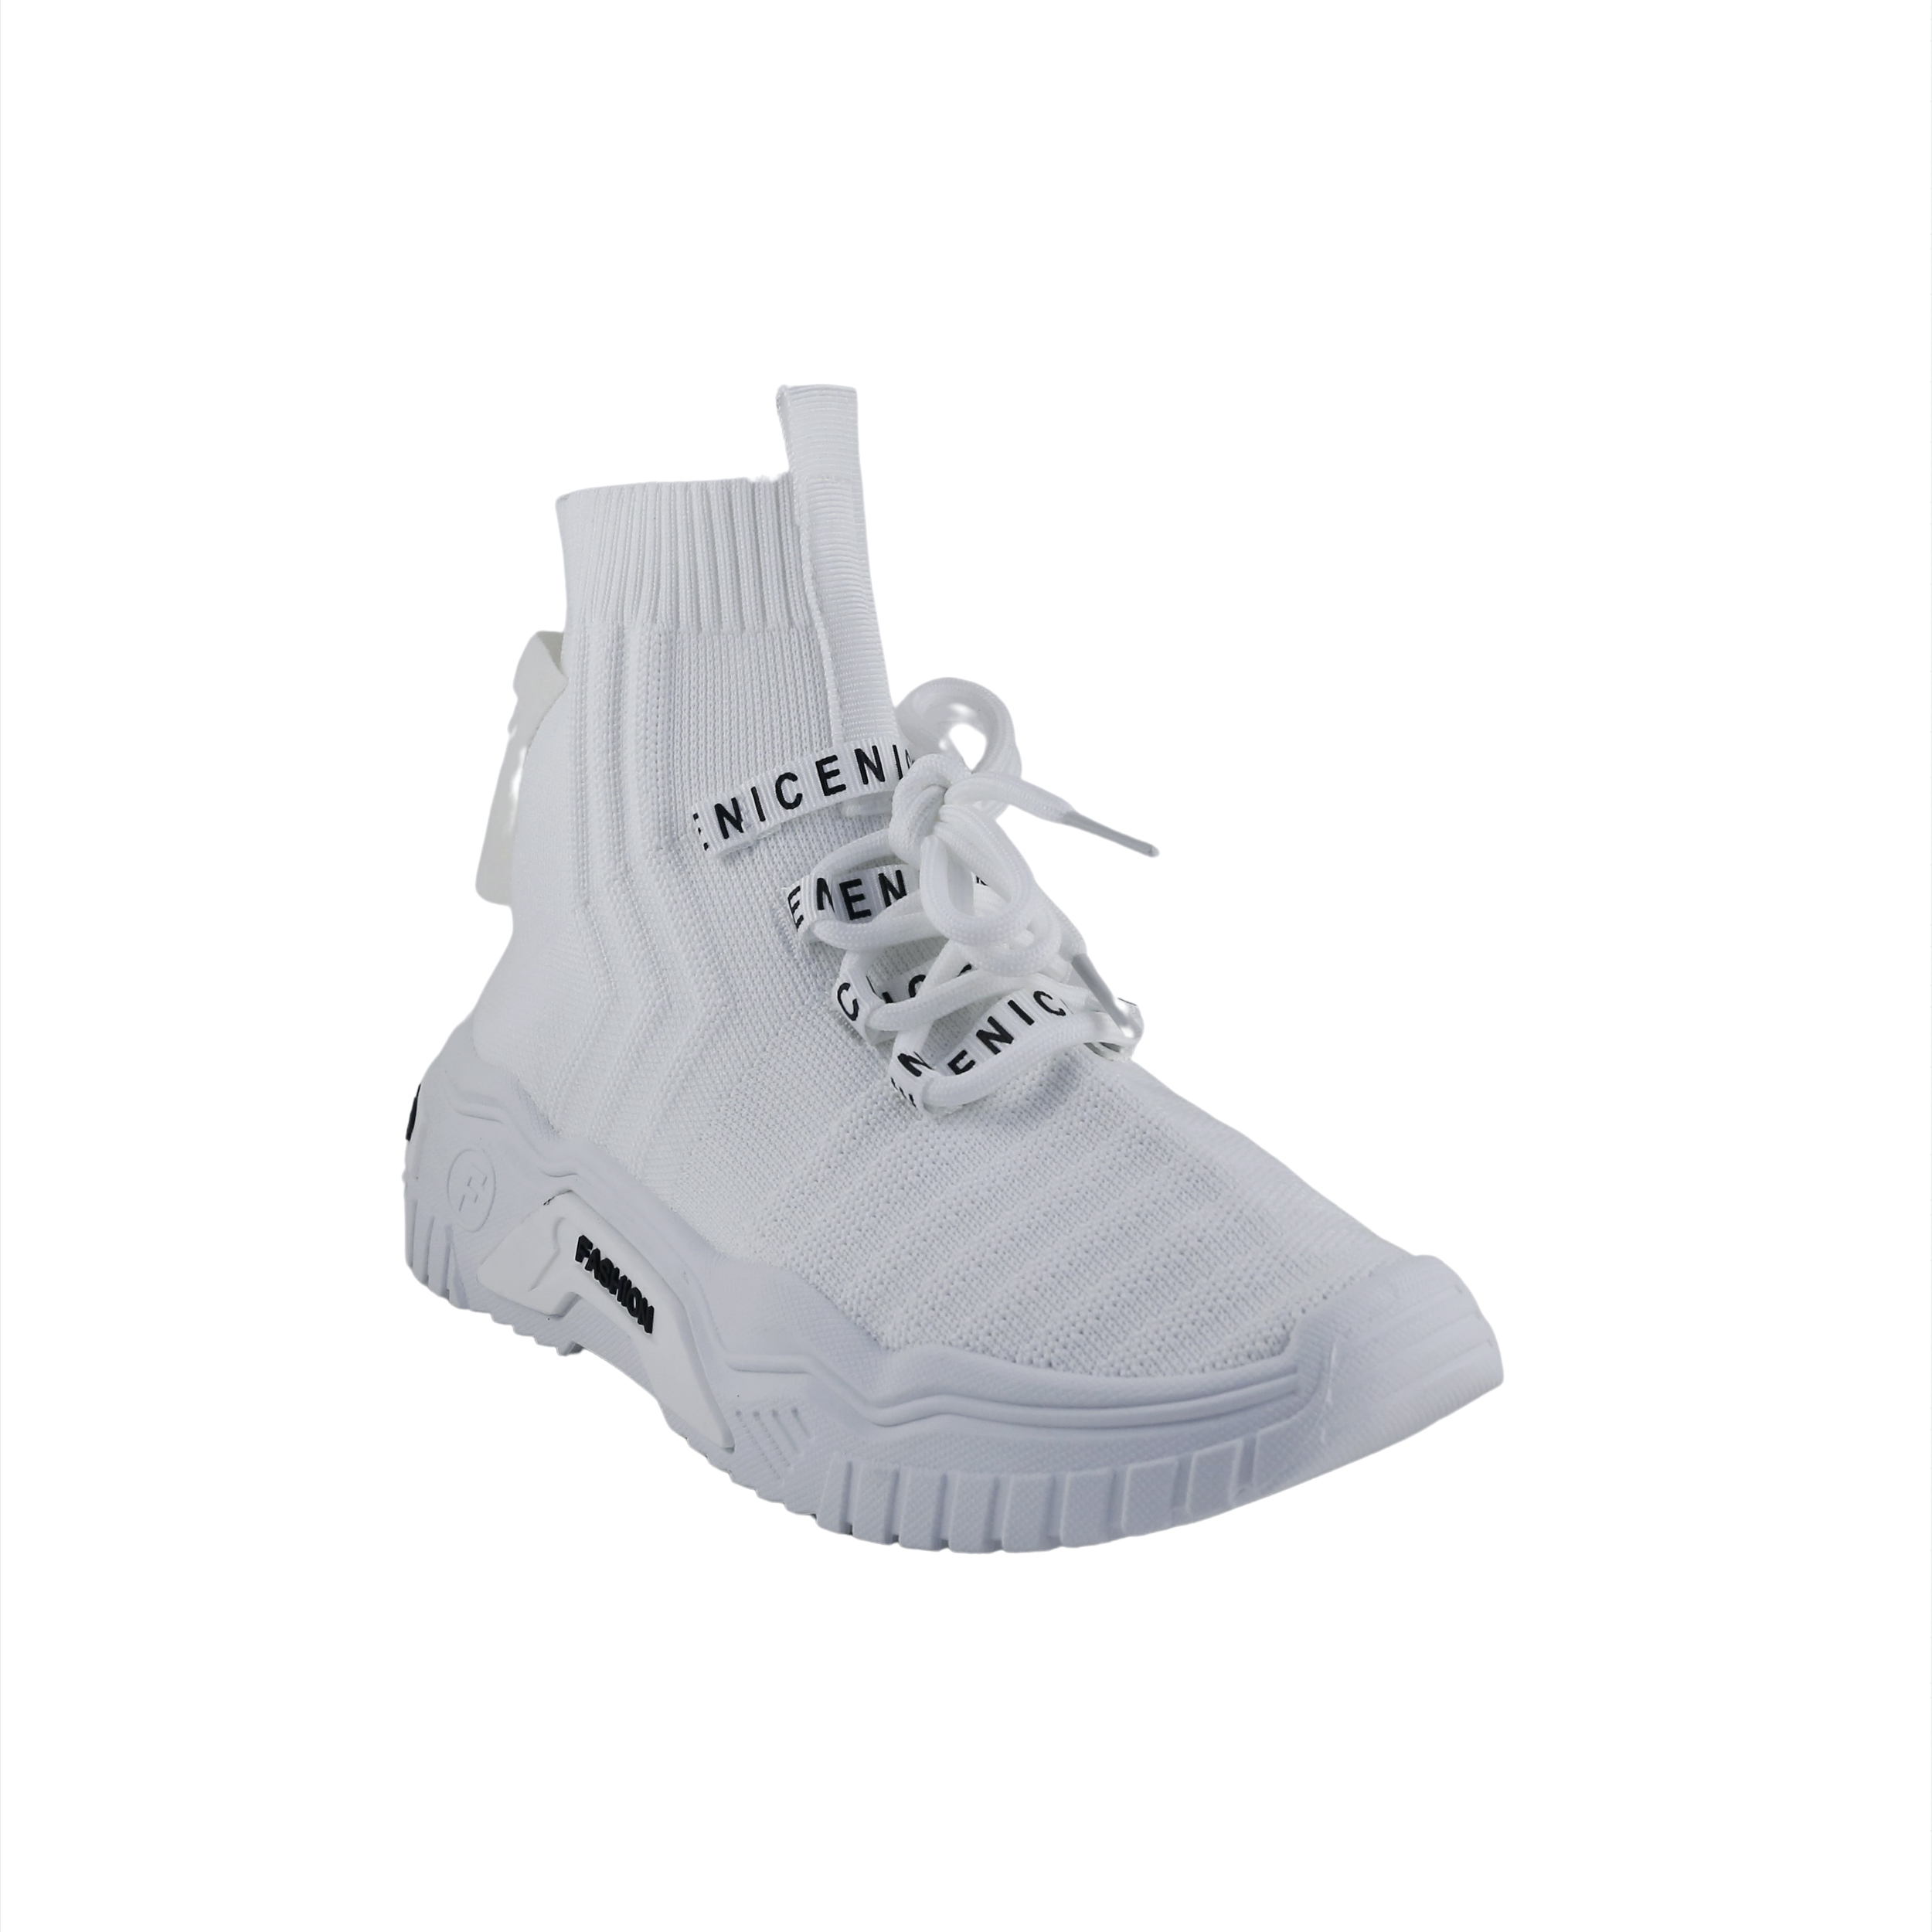 Woman Shoes Casual-Sneakers White boot sneakers